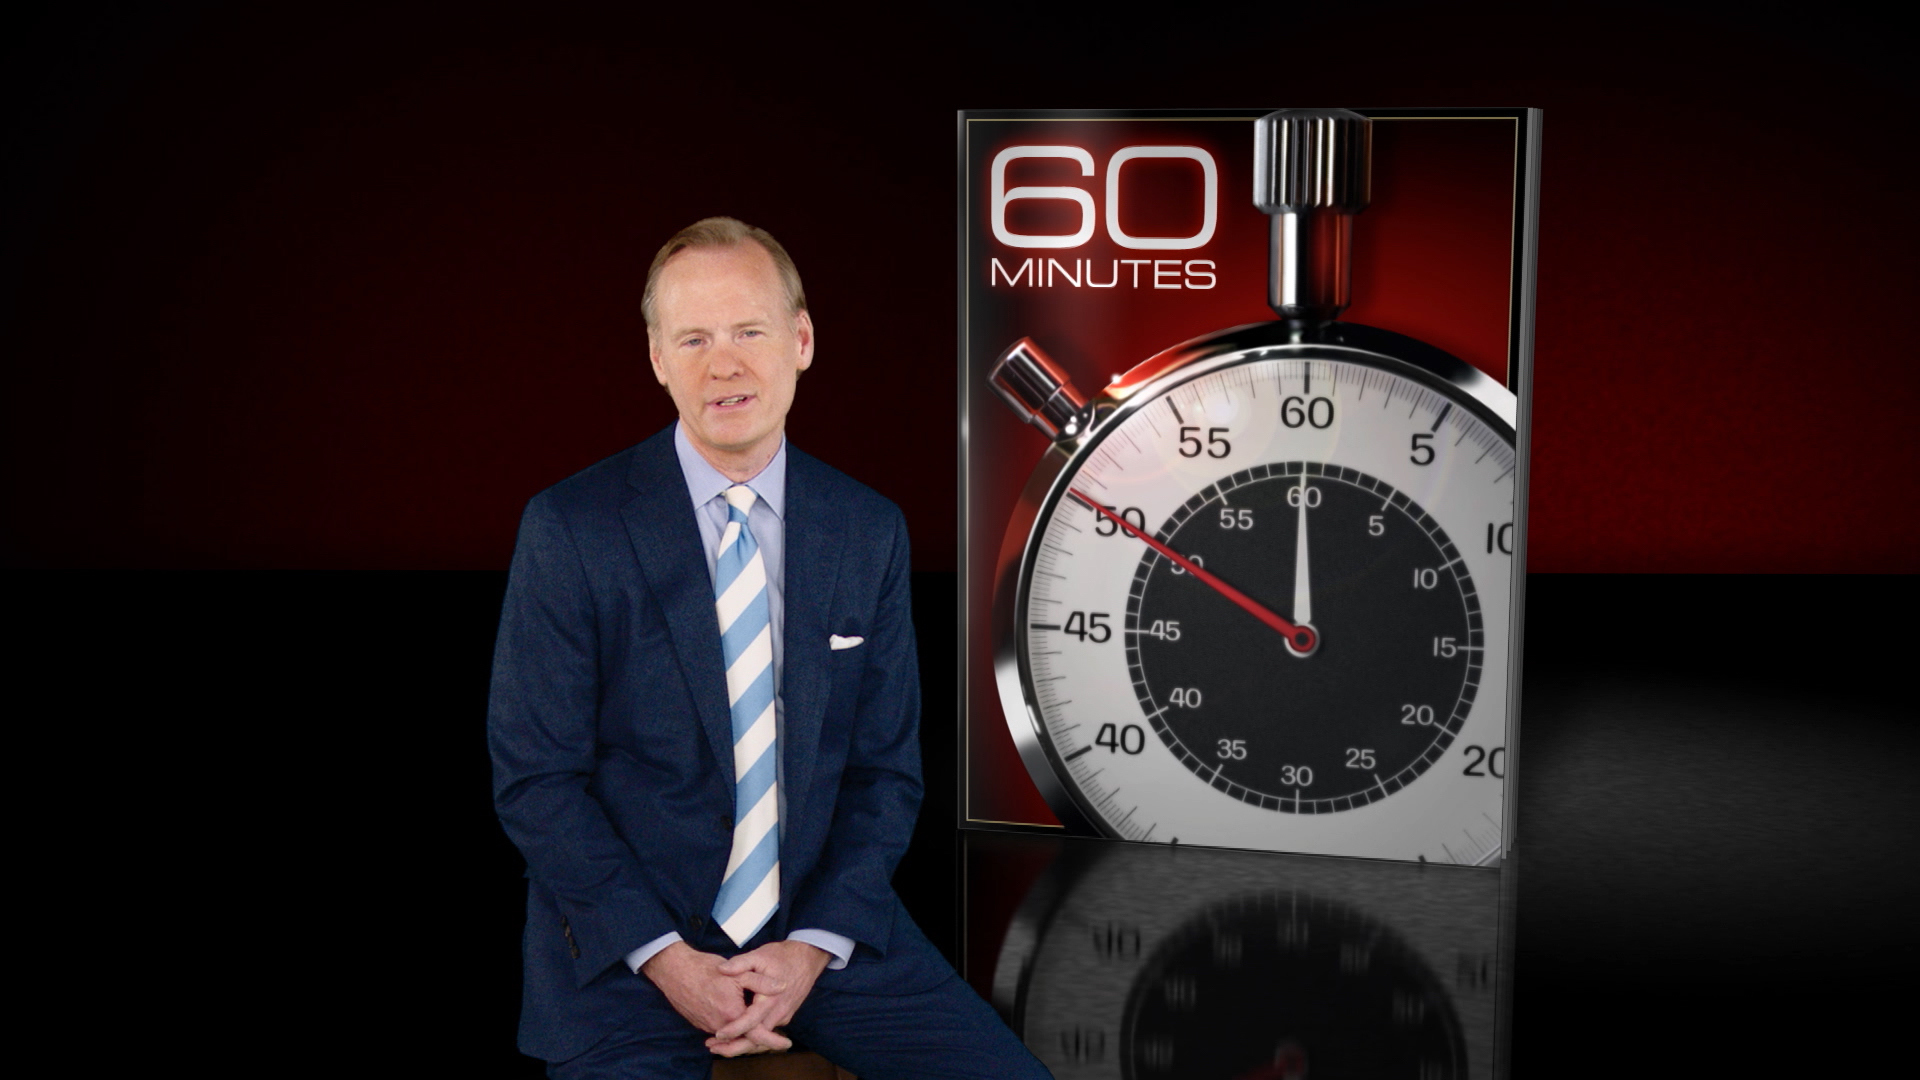 Watch 60 Minutes Overtime 60 Minutes to broadcast new episodes in June Full show on Paramount